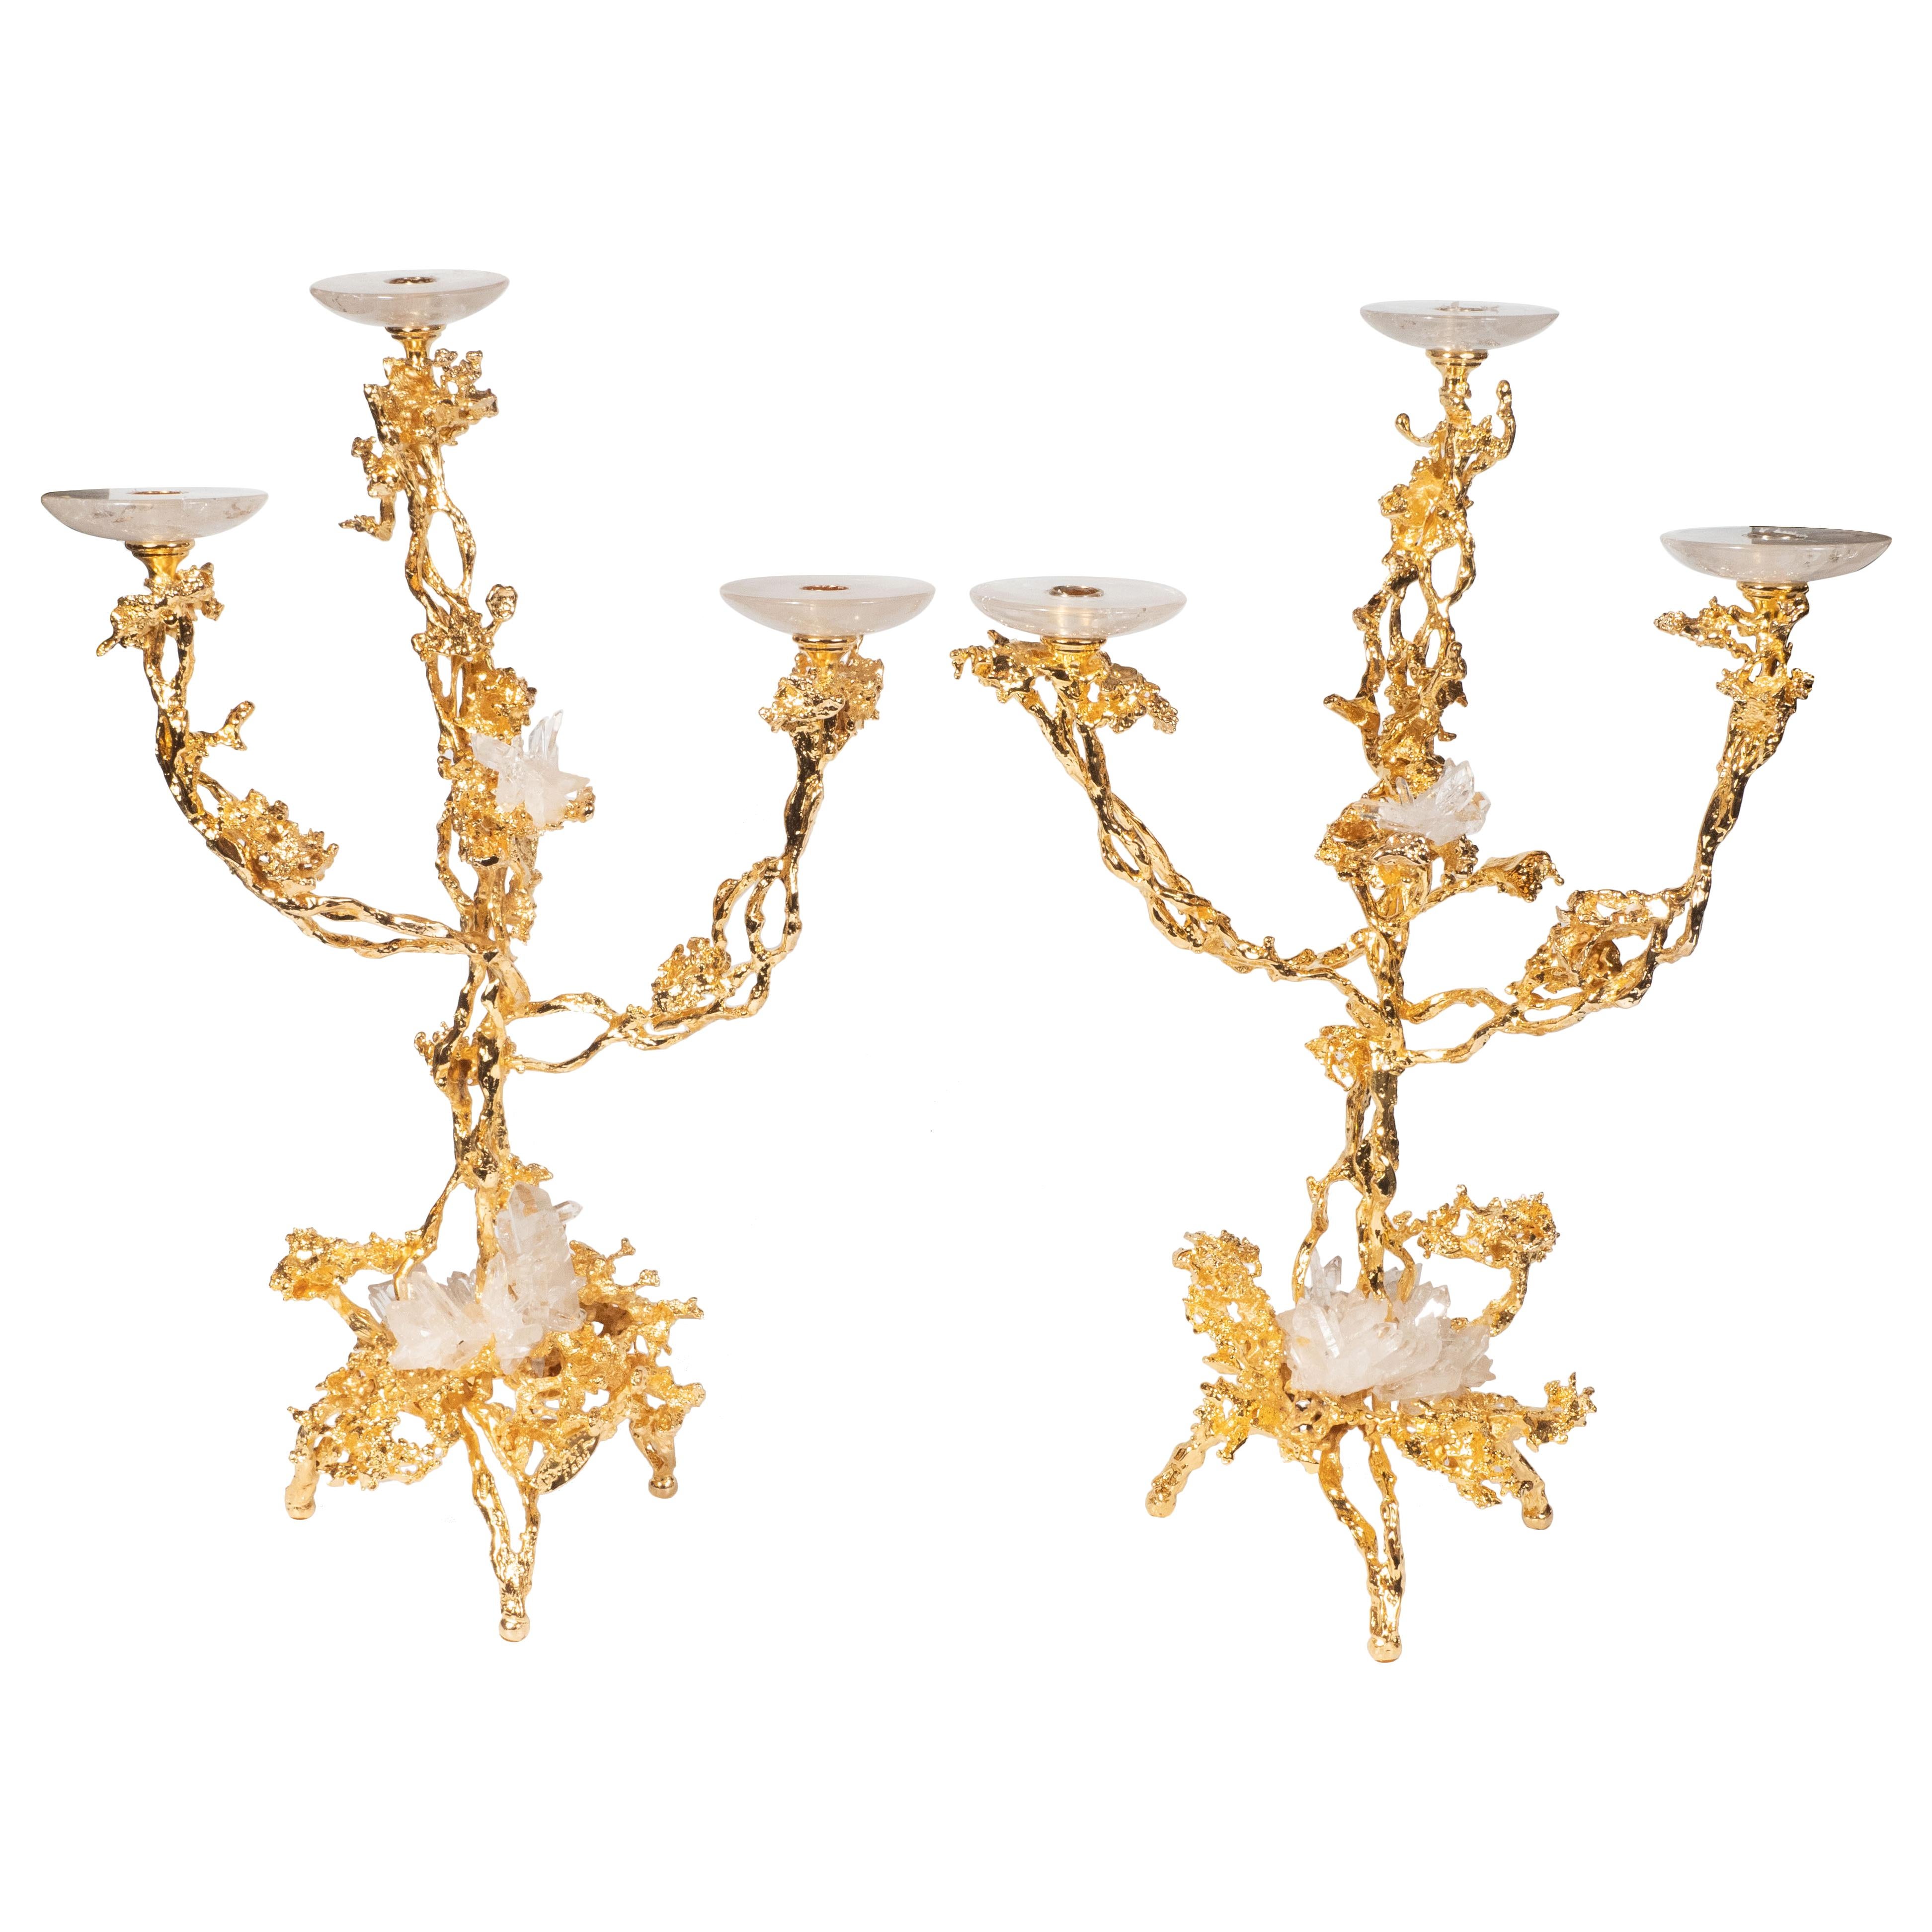 This stunning pair of Mid-Century Modern candlesticks were realized in France by the esteemed artisan Claude Victor Boeltz. They offer an exploded form sculpted, by hand, and cast in bronze, consisting of two arms and three feet plated in 24-karat